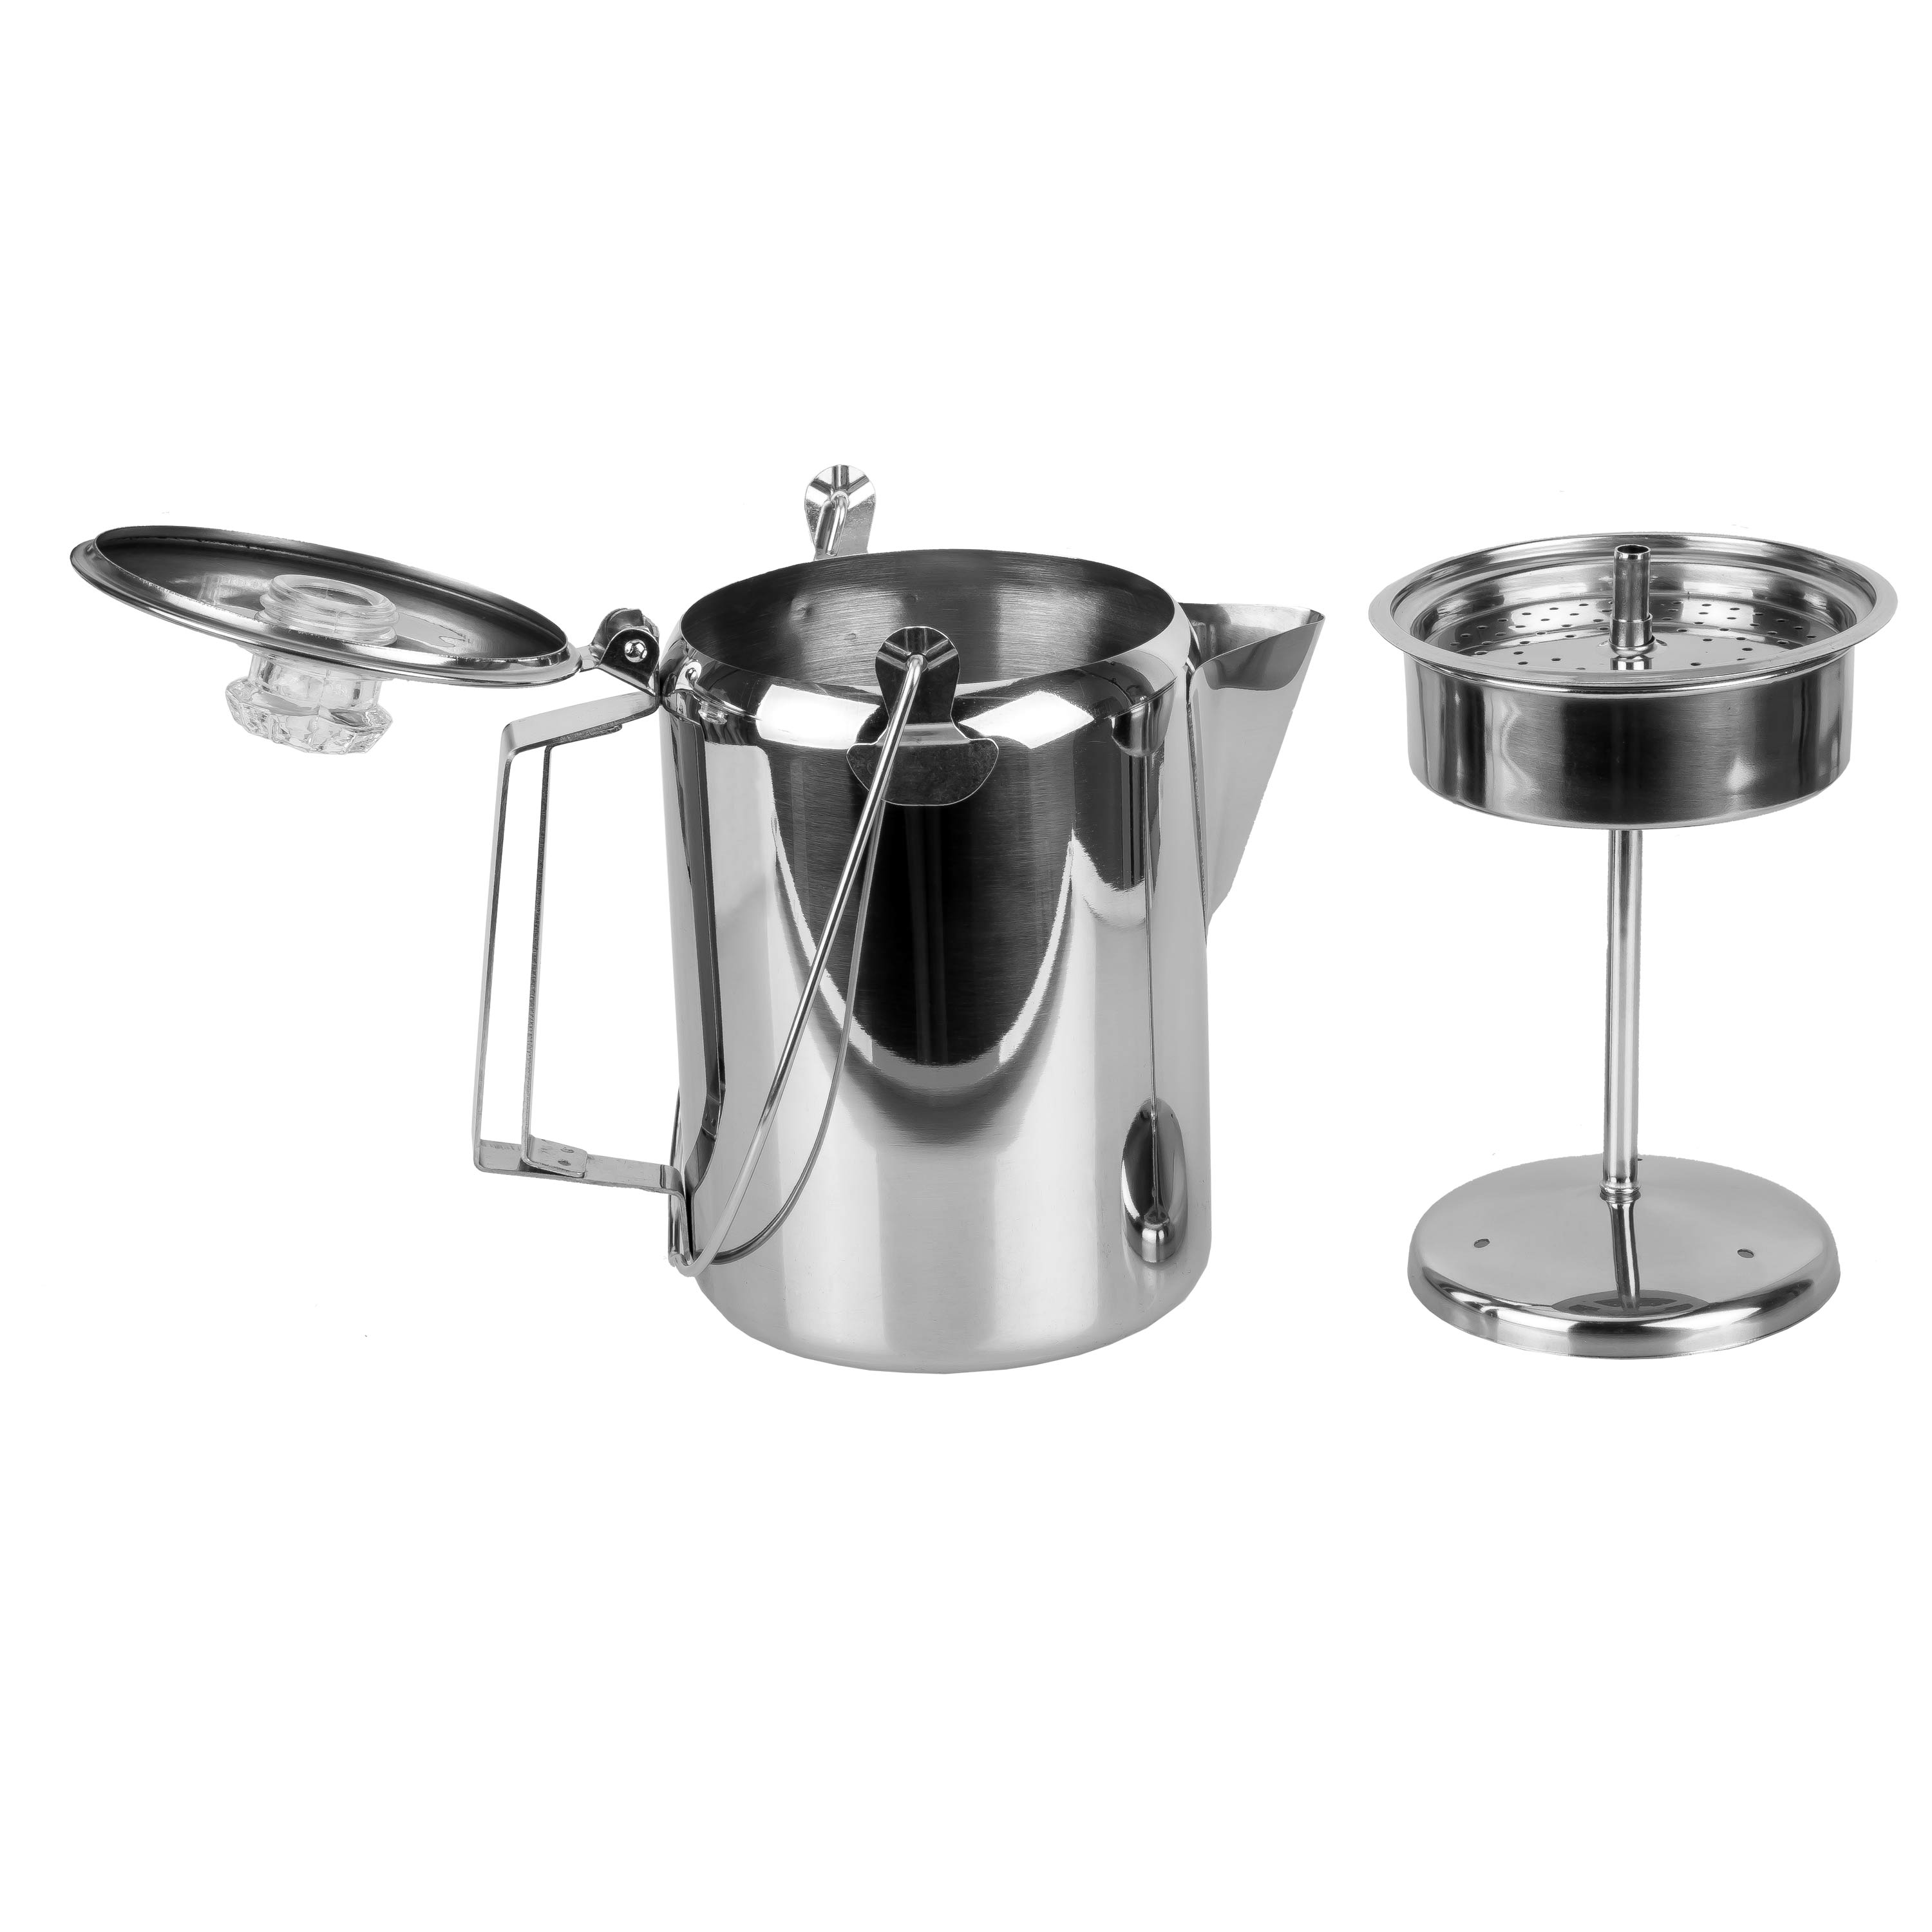 1.2L 9 Cups Outdoor Percolator Coffee Pot Stainless Steel For